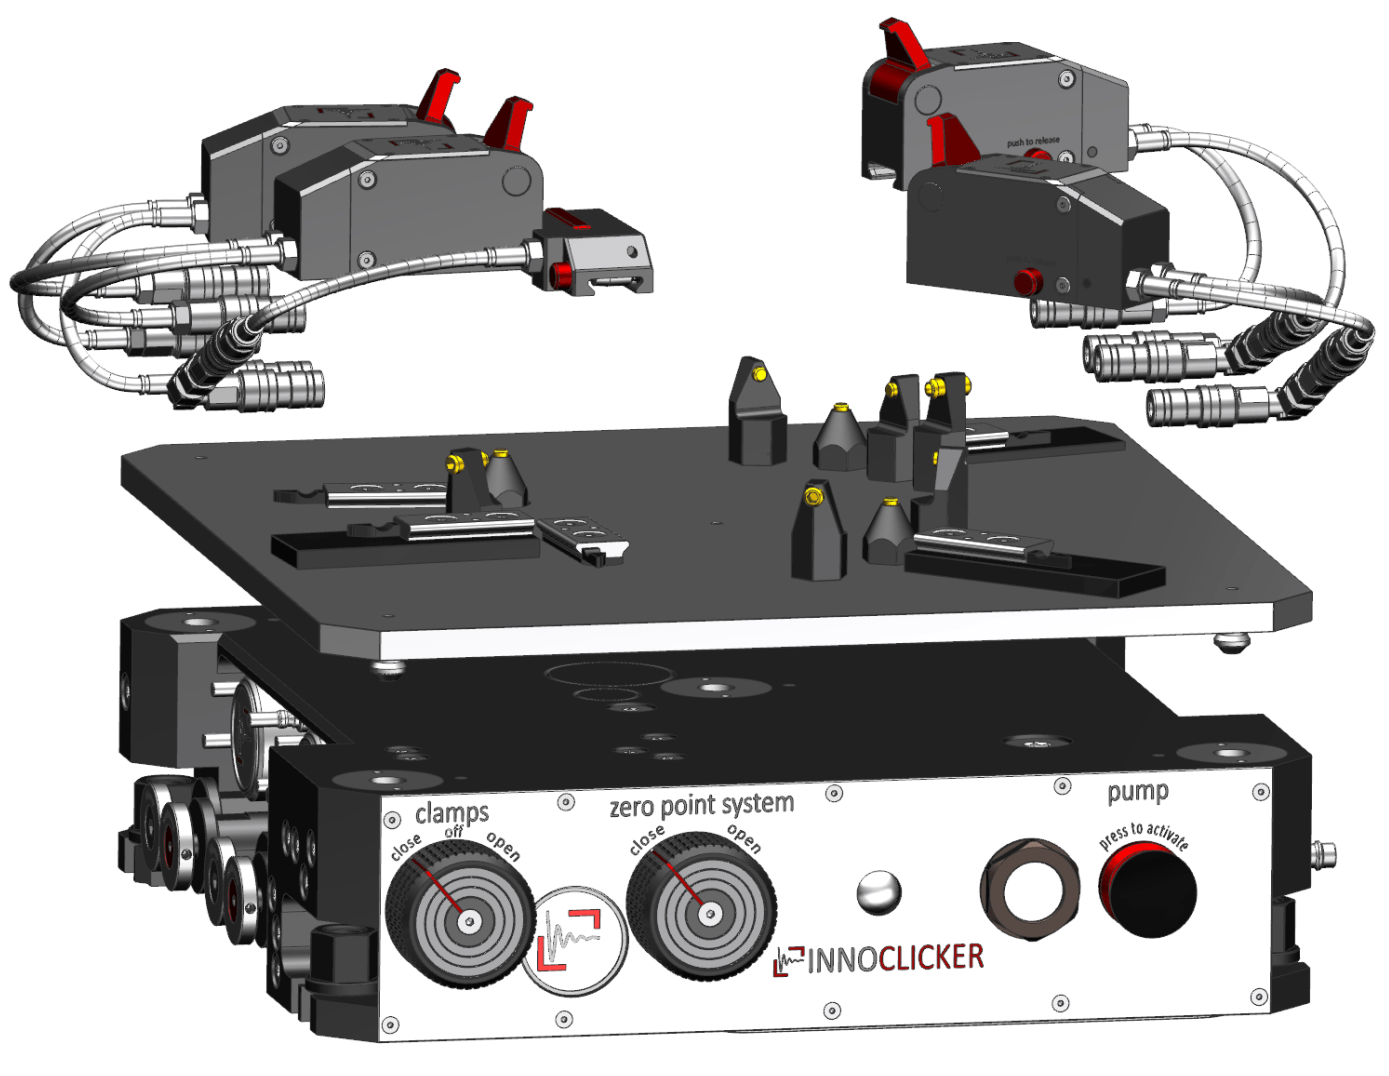 Innoclicker clamping system exploded view